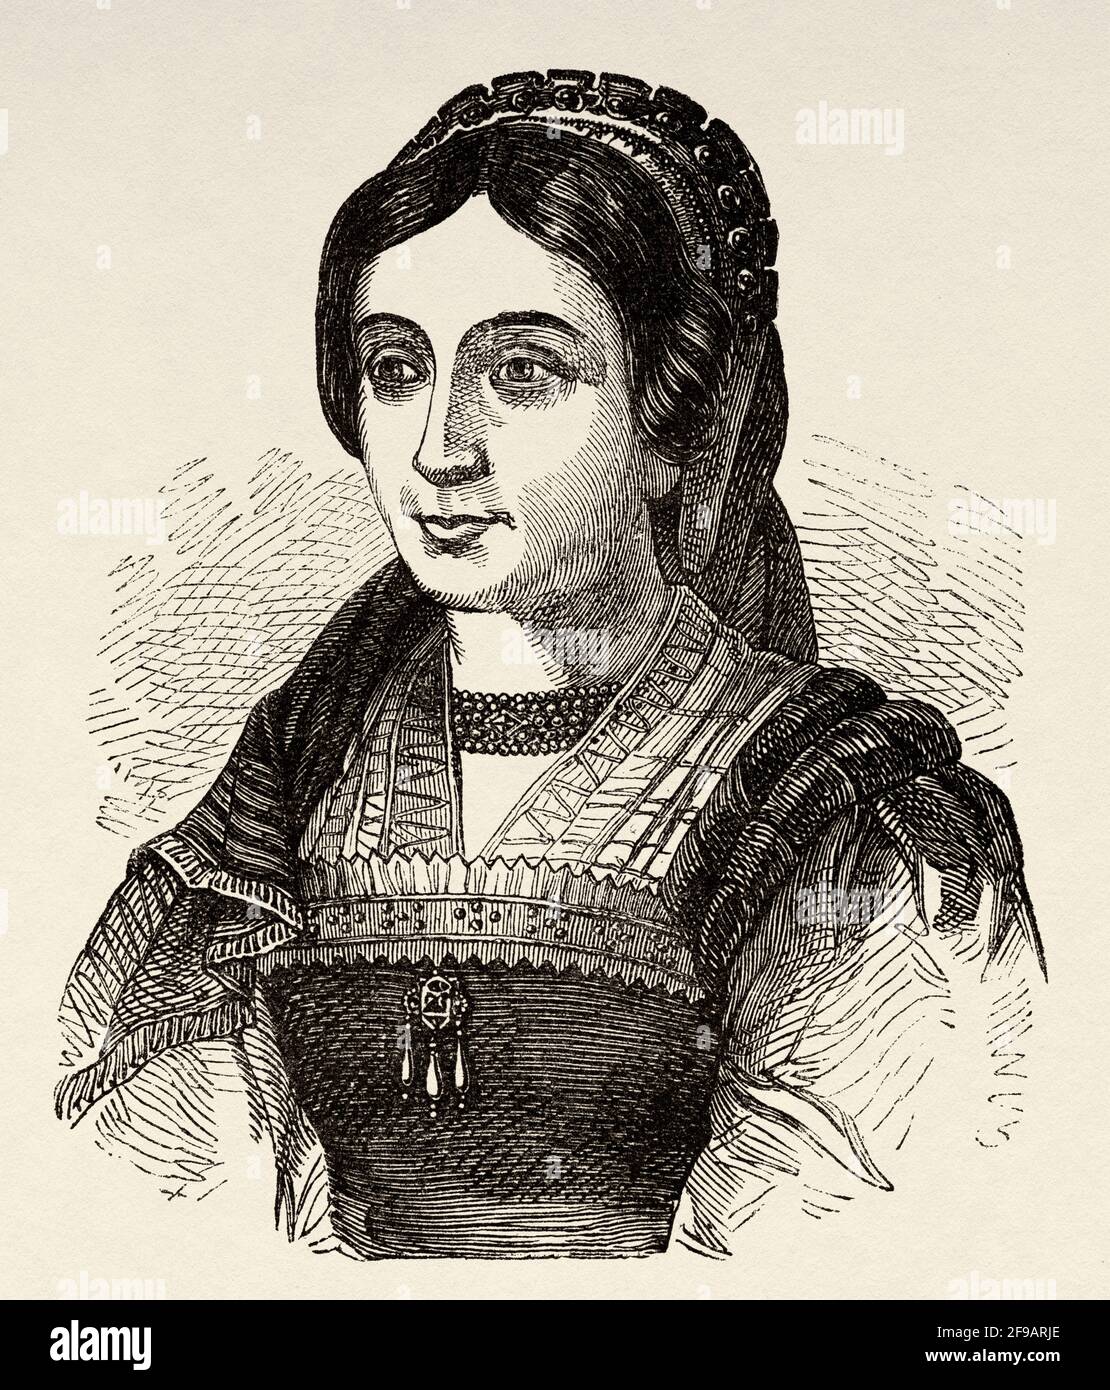 Renée of France (1510-1574) Duchess of Ferrara  to her marriage to Ercole II d'Este, grandson of Pope Alexander VI. Younger surviving child of Louis XII of France and Anne of Brittany. Supporter of the Protestant Reformation and ally of John Calvin. Old 19th century engraved illustration from Souvenirs de la Reformation en Italie 1883 by John Stoughton (1807-1897) Stock Photo